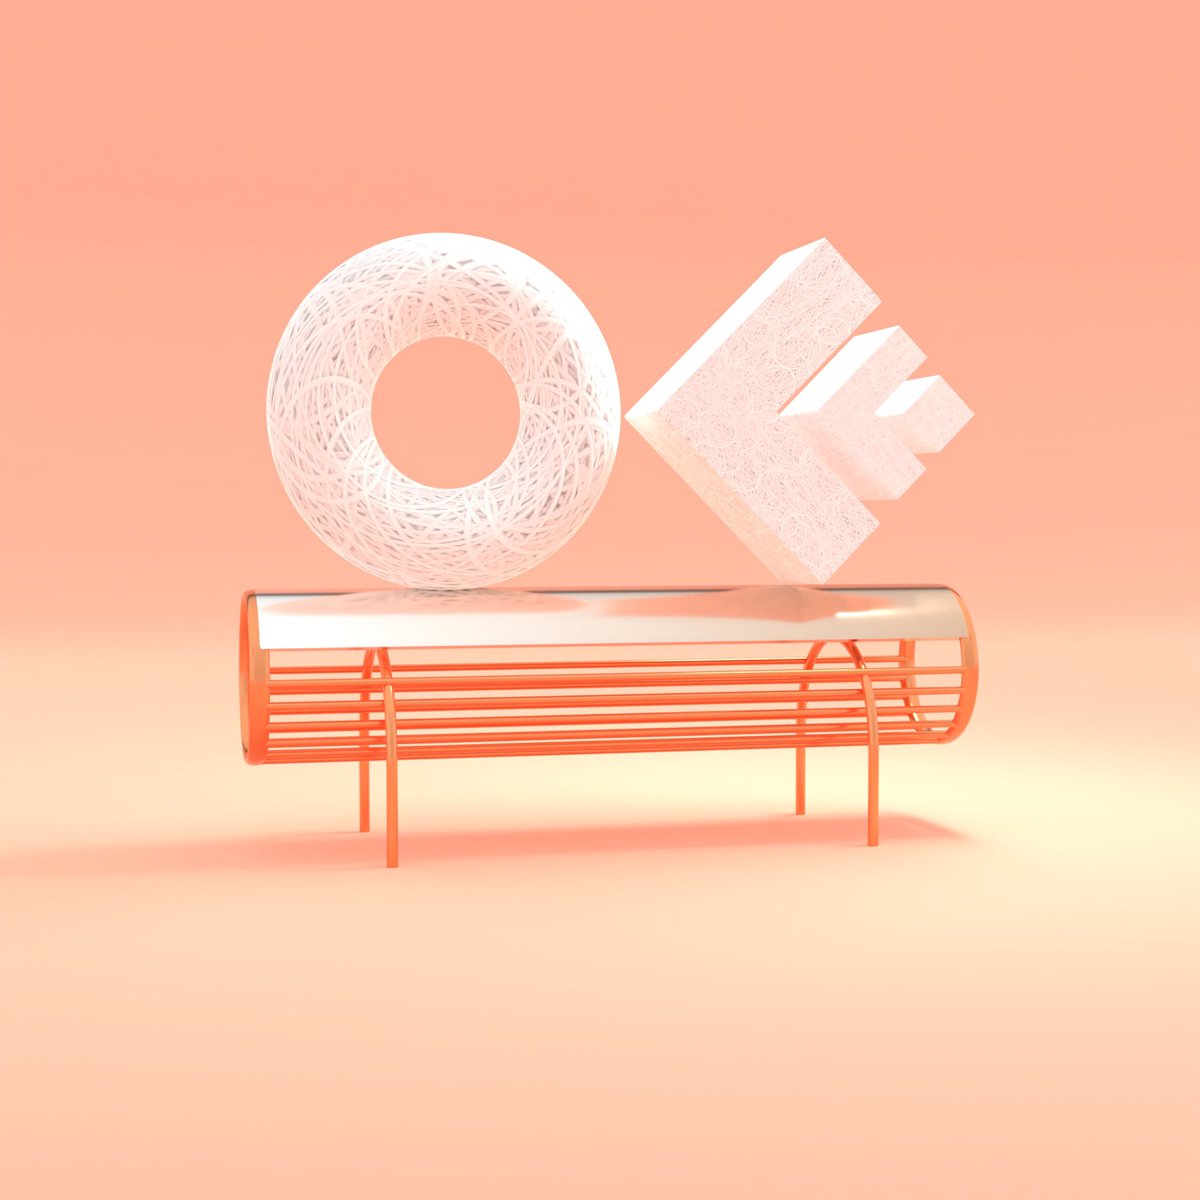 Hello 👋 @OFFFest 
Made with ❤️ in @vectary 
#offf2020 #offfbarcelona #logo #3d #vectary #space #ondimensions #design